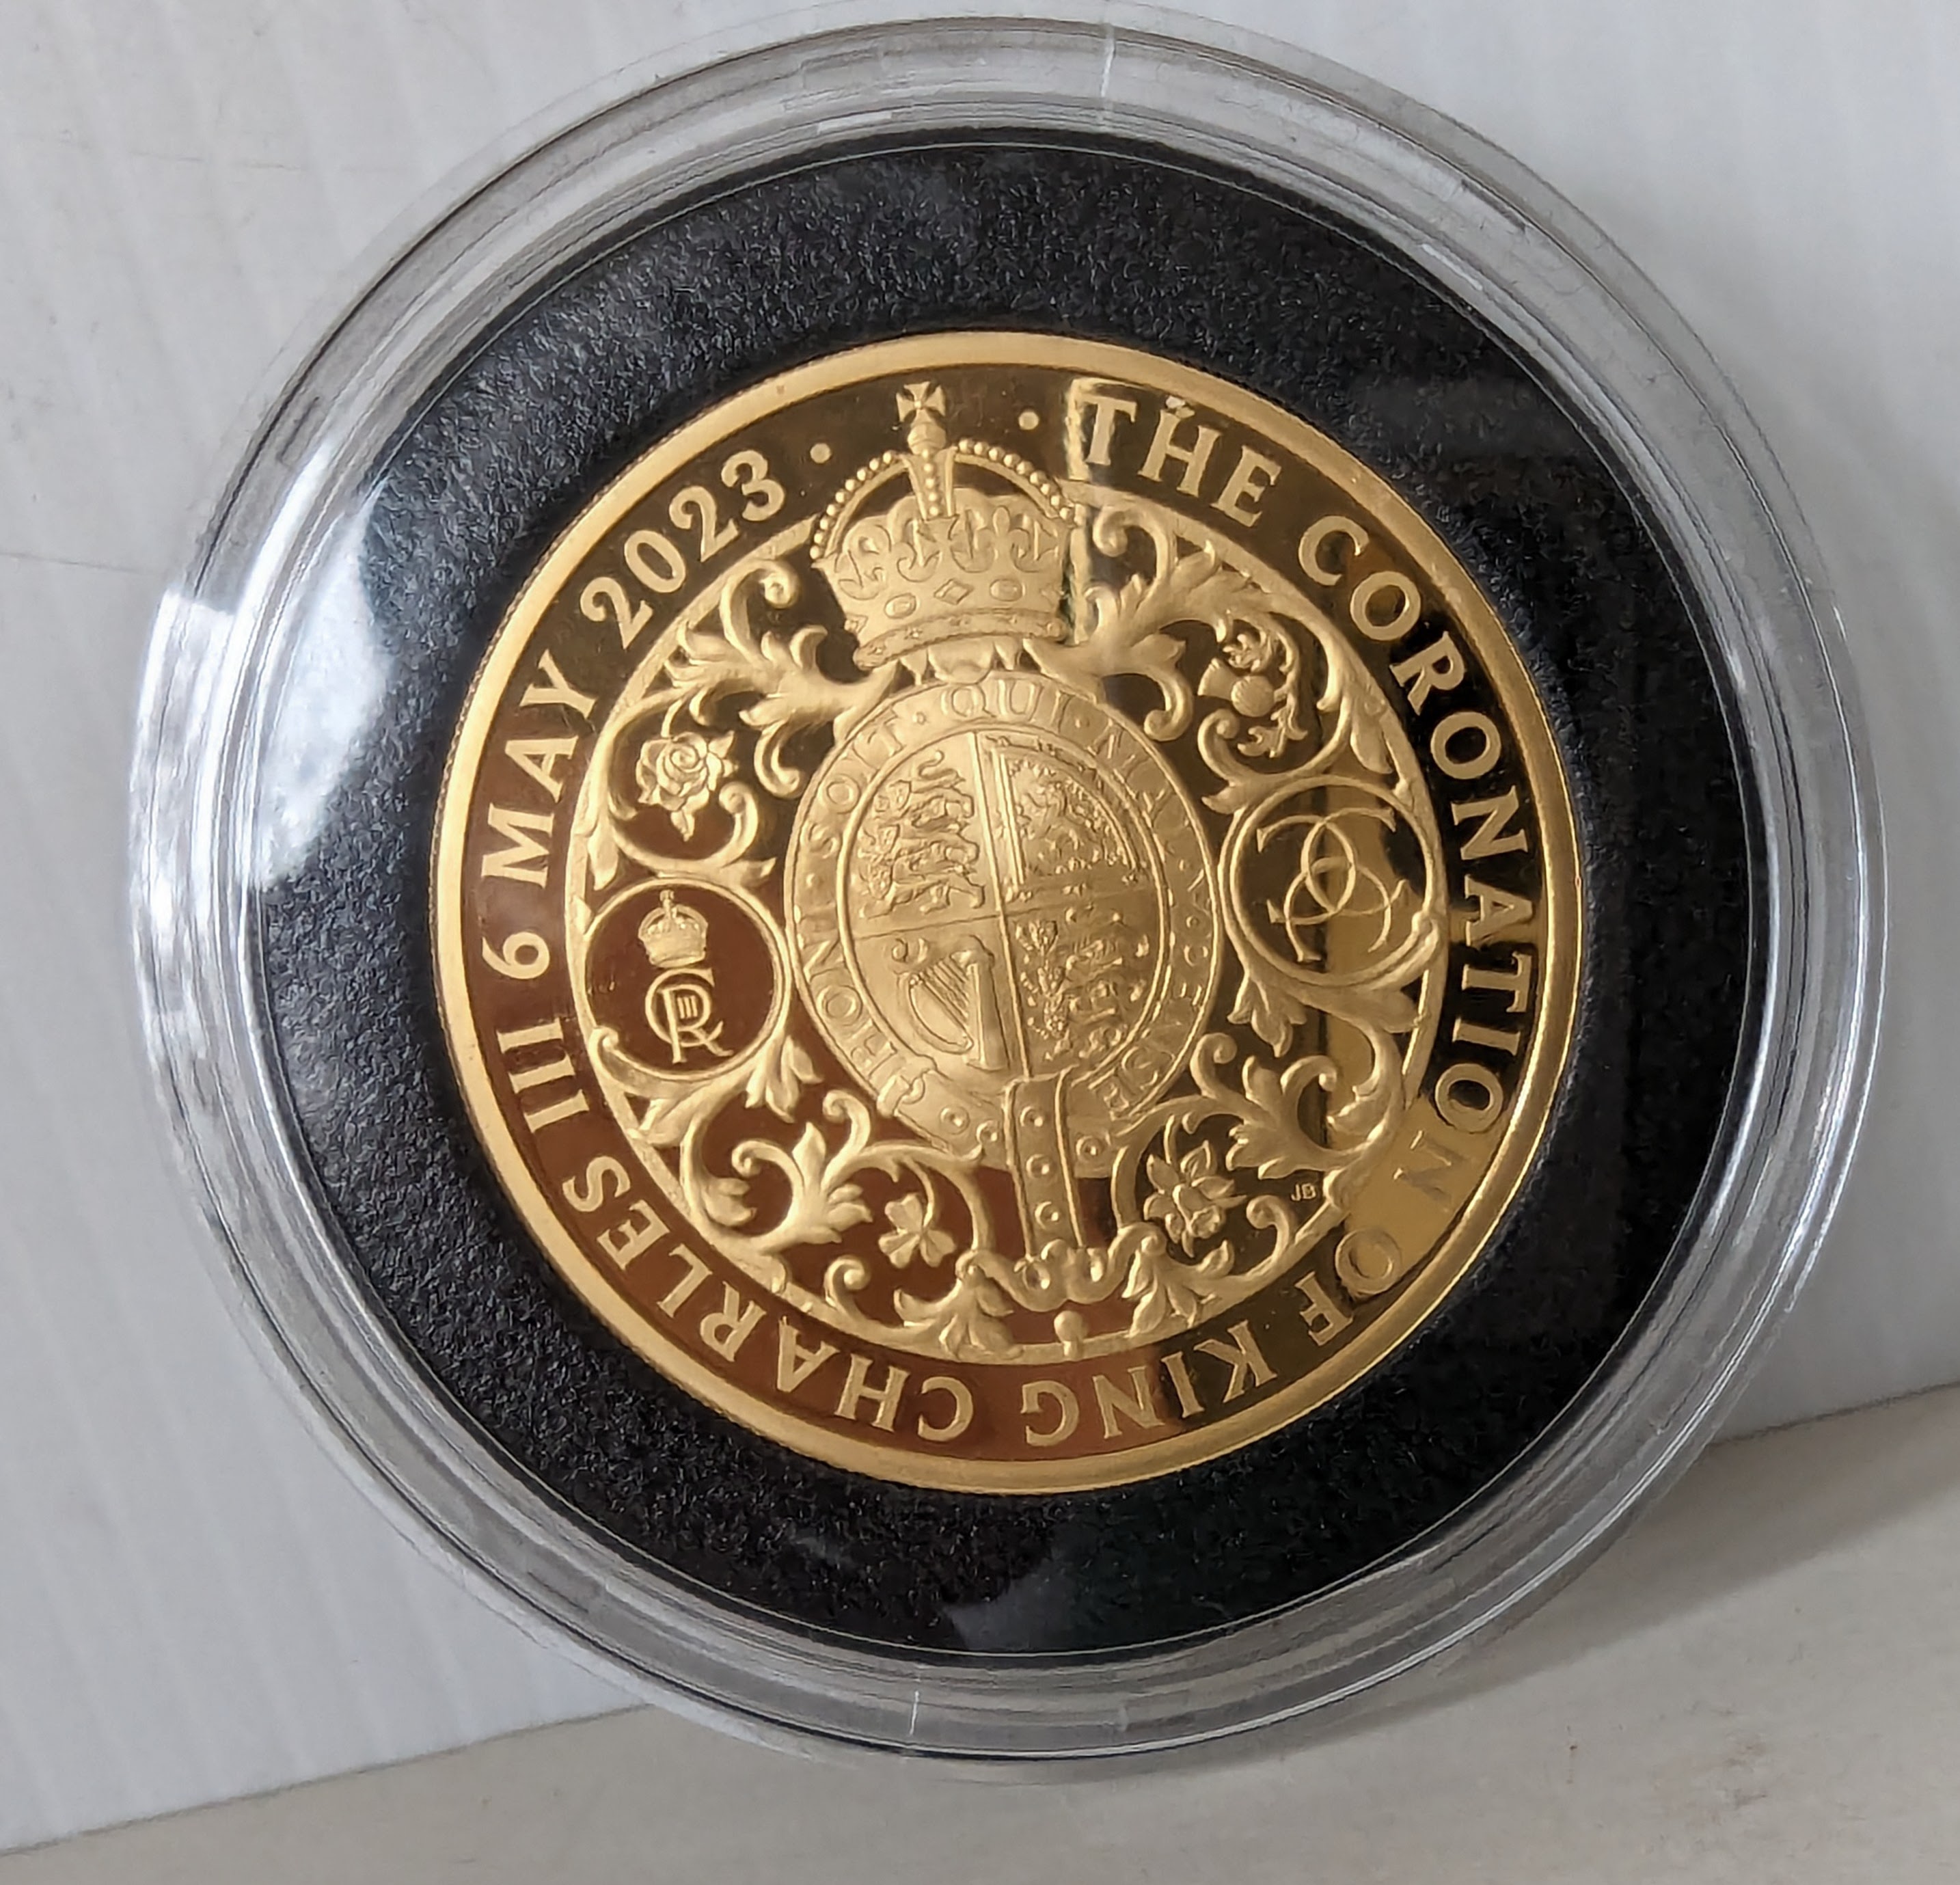 The Royal Mint Coronation of His Majesty King Charles III 2023 UK 5oz 999.9 Gold Proof Coin - Image 3 of 6